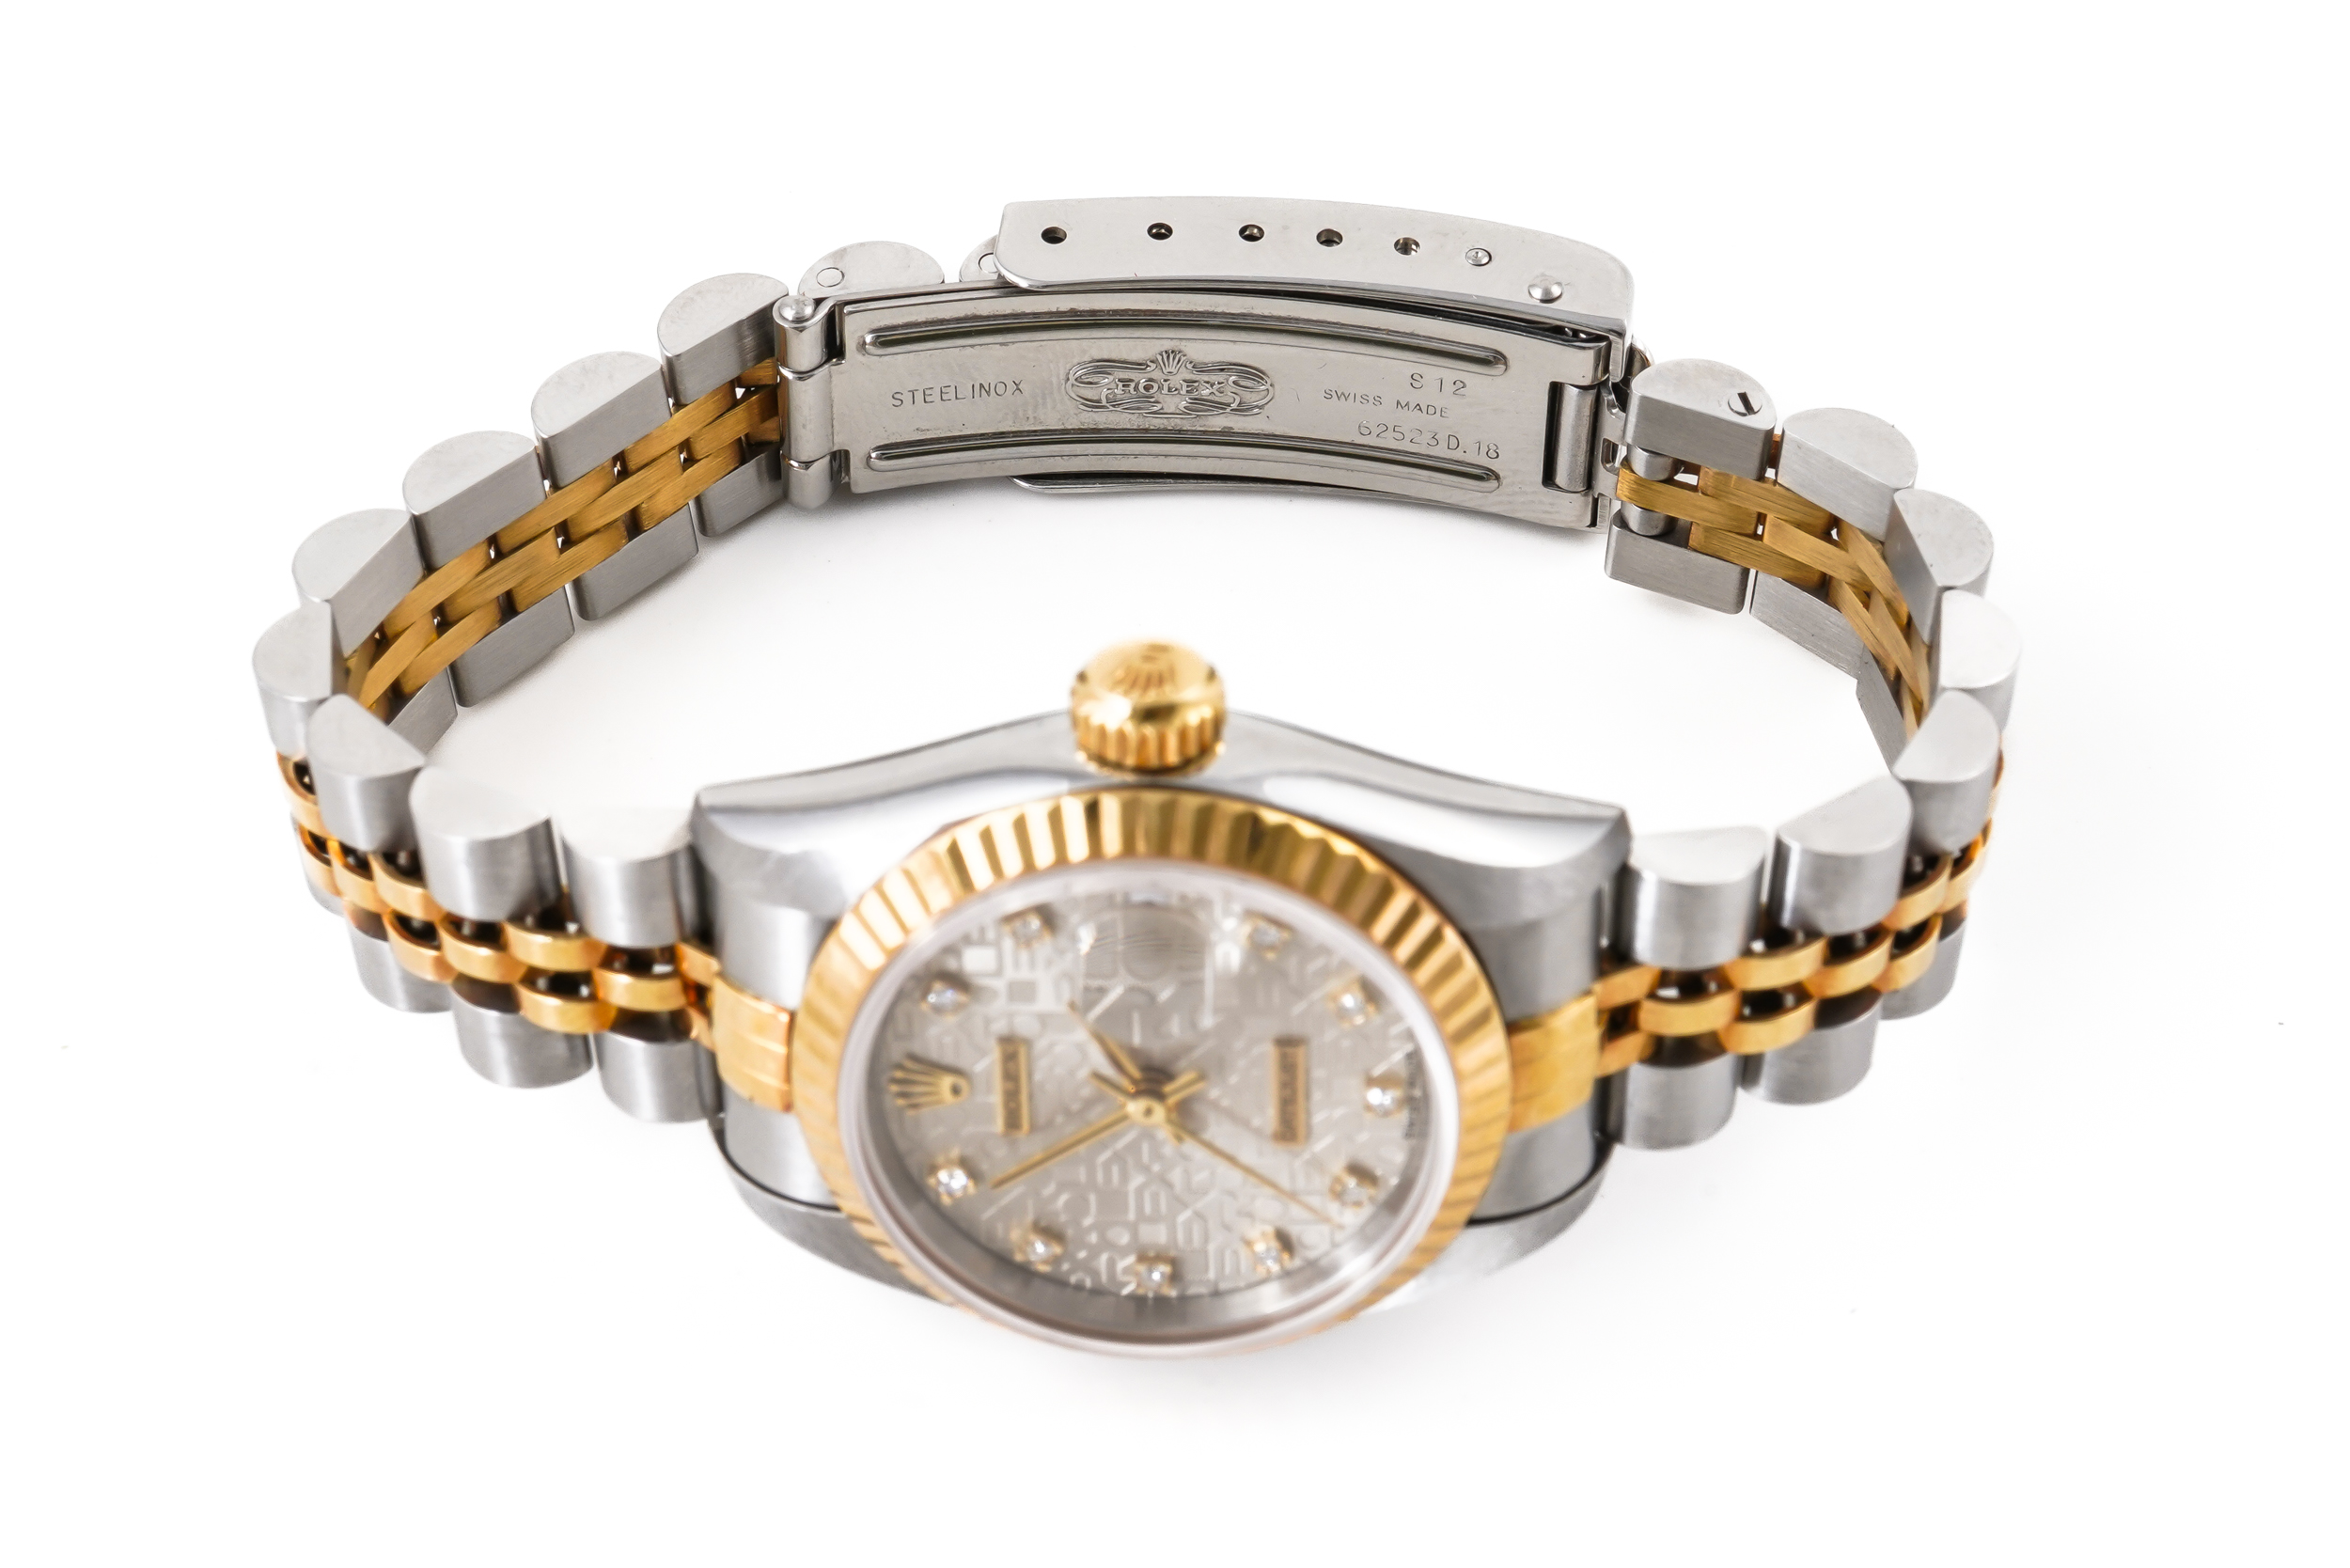 A LADY'S STEEL AND GOLD DATEJUST ROLEX WRISTWATCH - Image 3 of 6